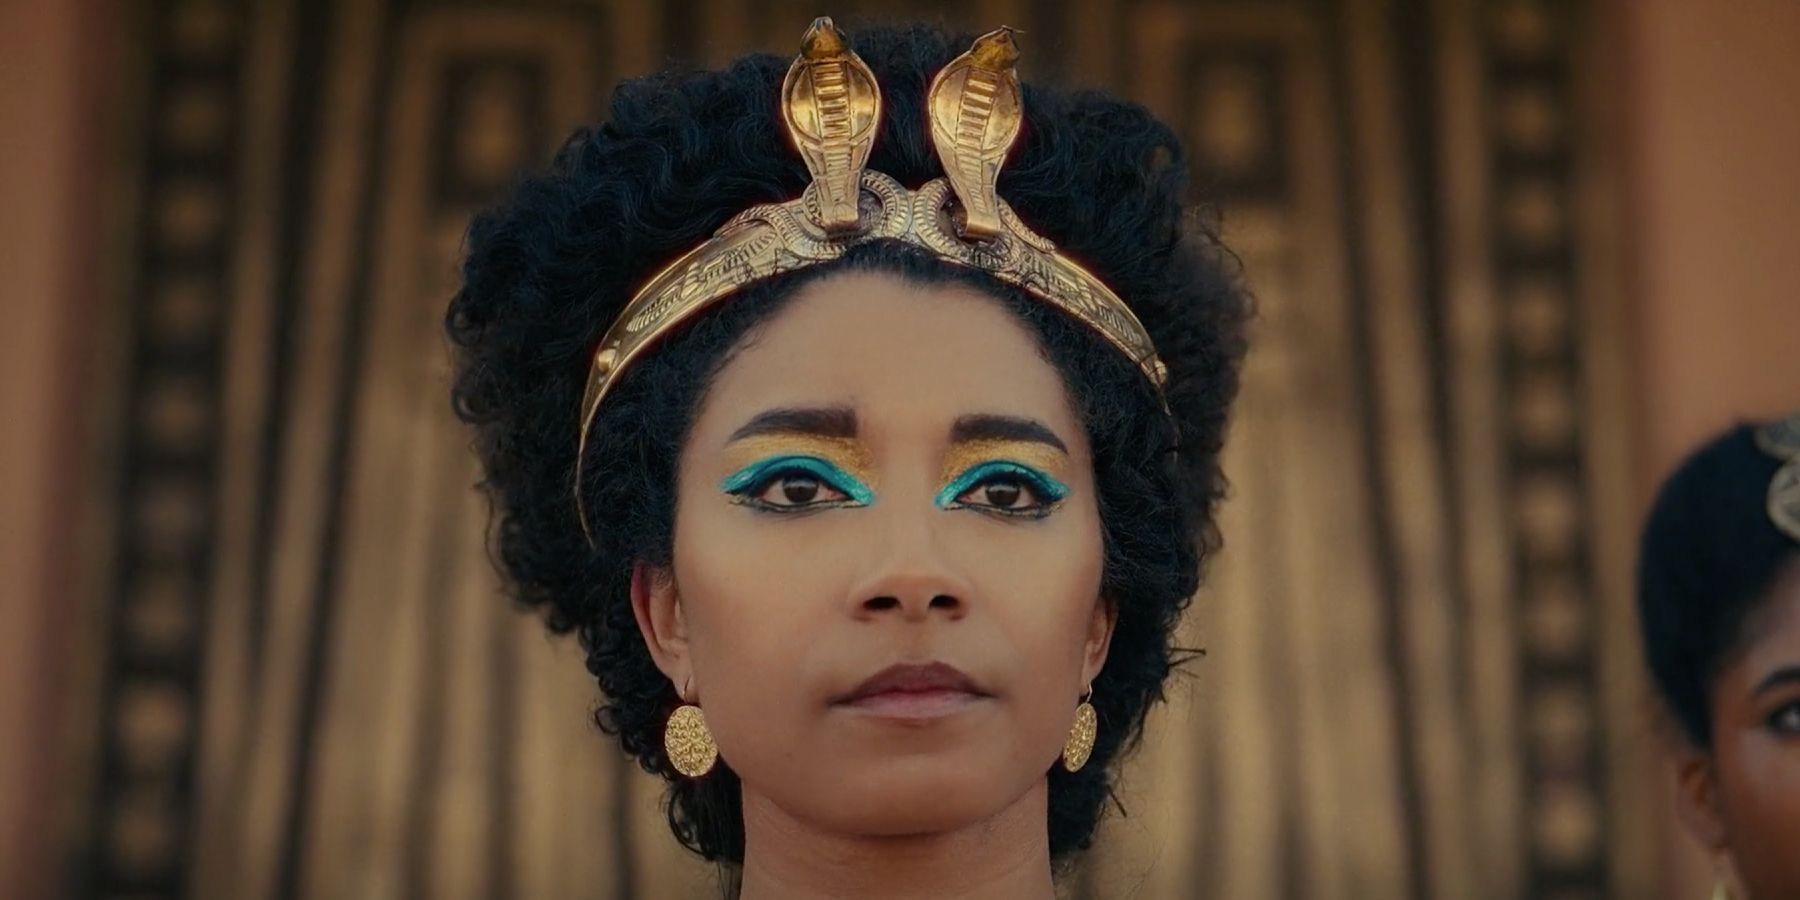 Adele James as Cleopatra looking out in Queen Cleopatra with snake crown